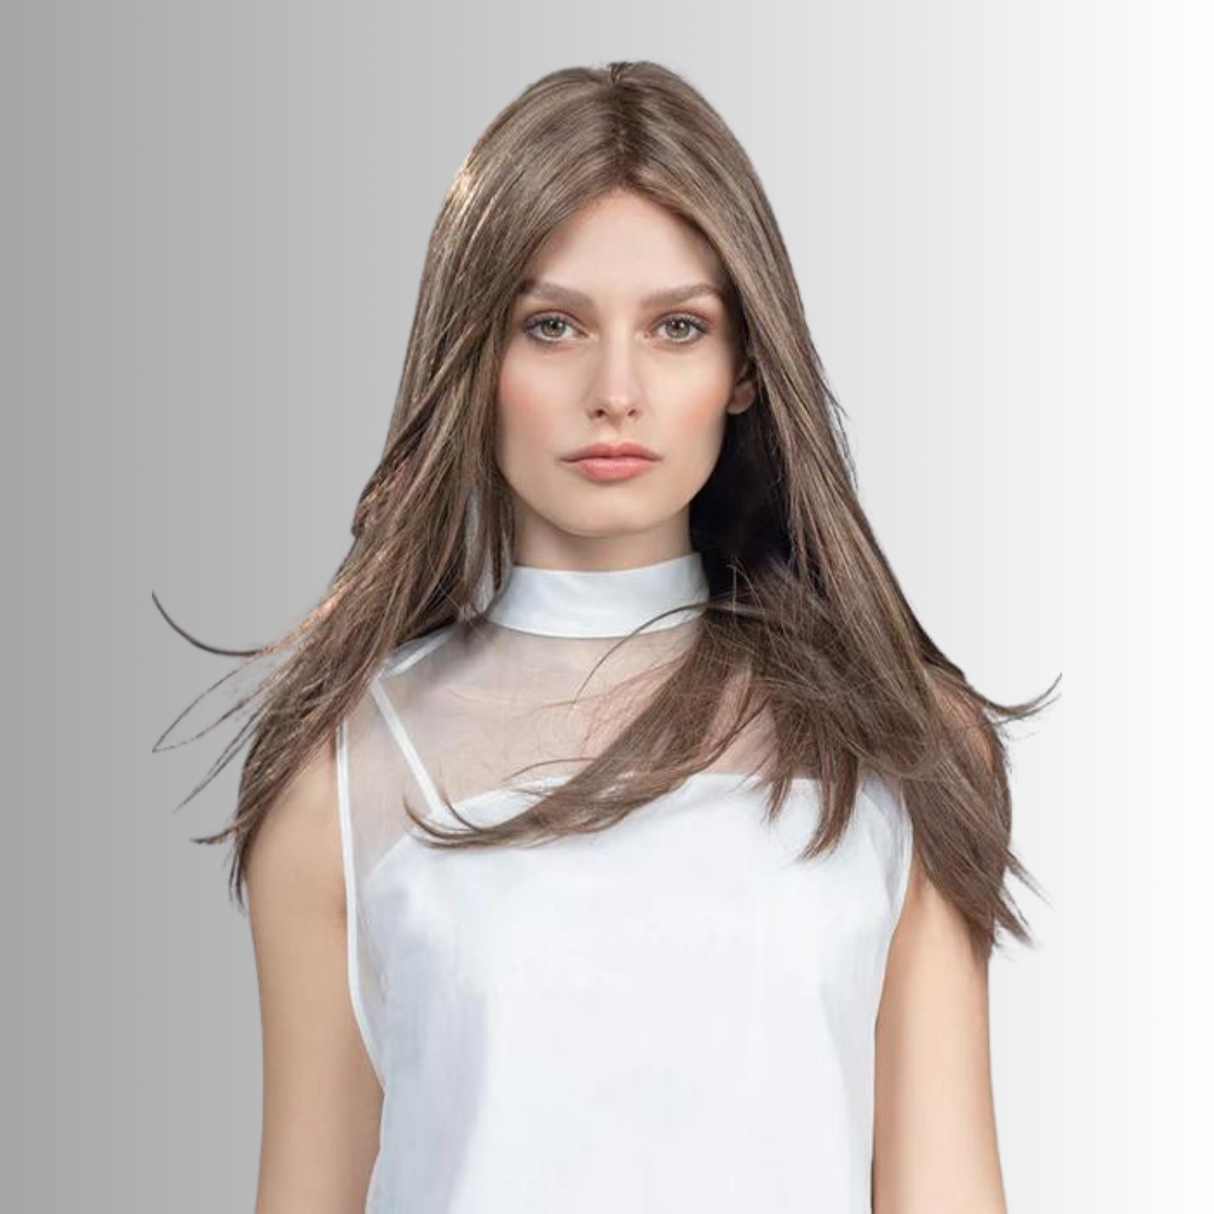 Impact Remy Human Hair Topper - Top Power Collection by Ellen Wille